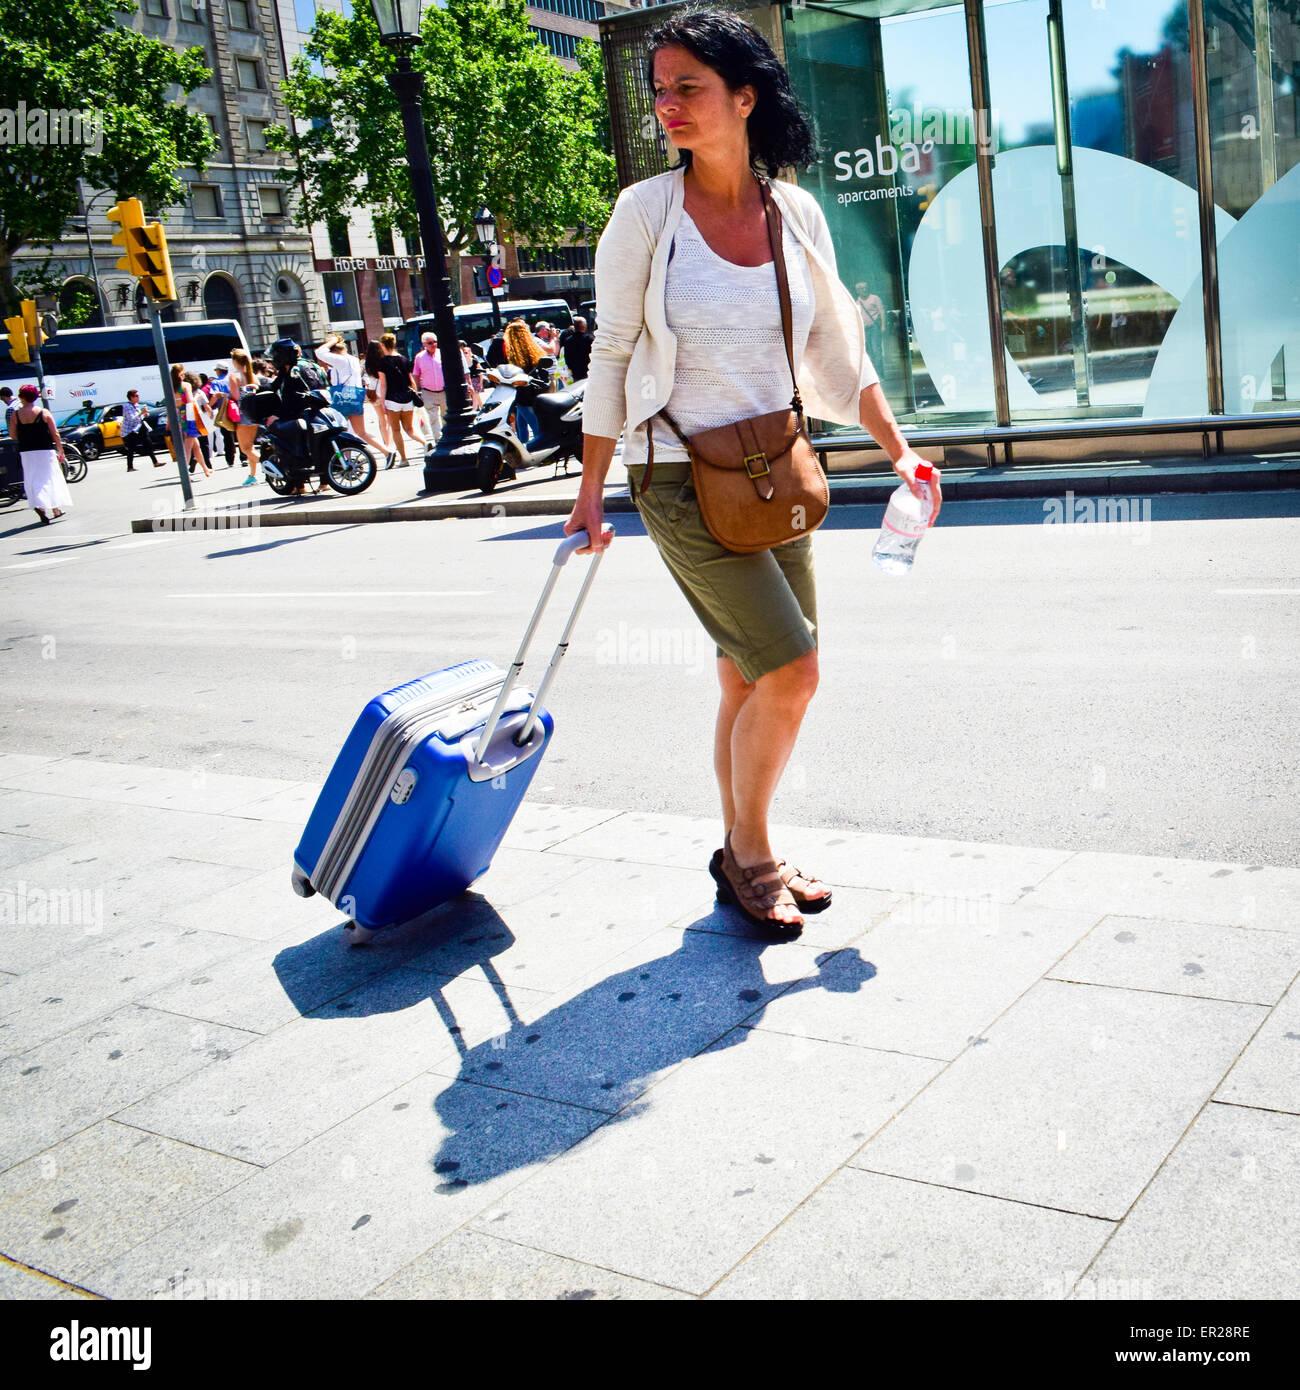 Woman walking with a wheeled suitcase. Barcelona, Catalonia, Spain. Stock Photo